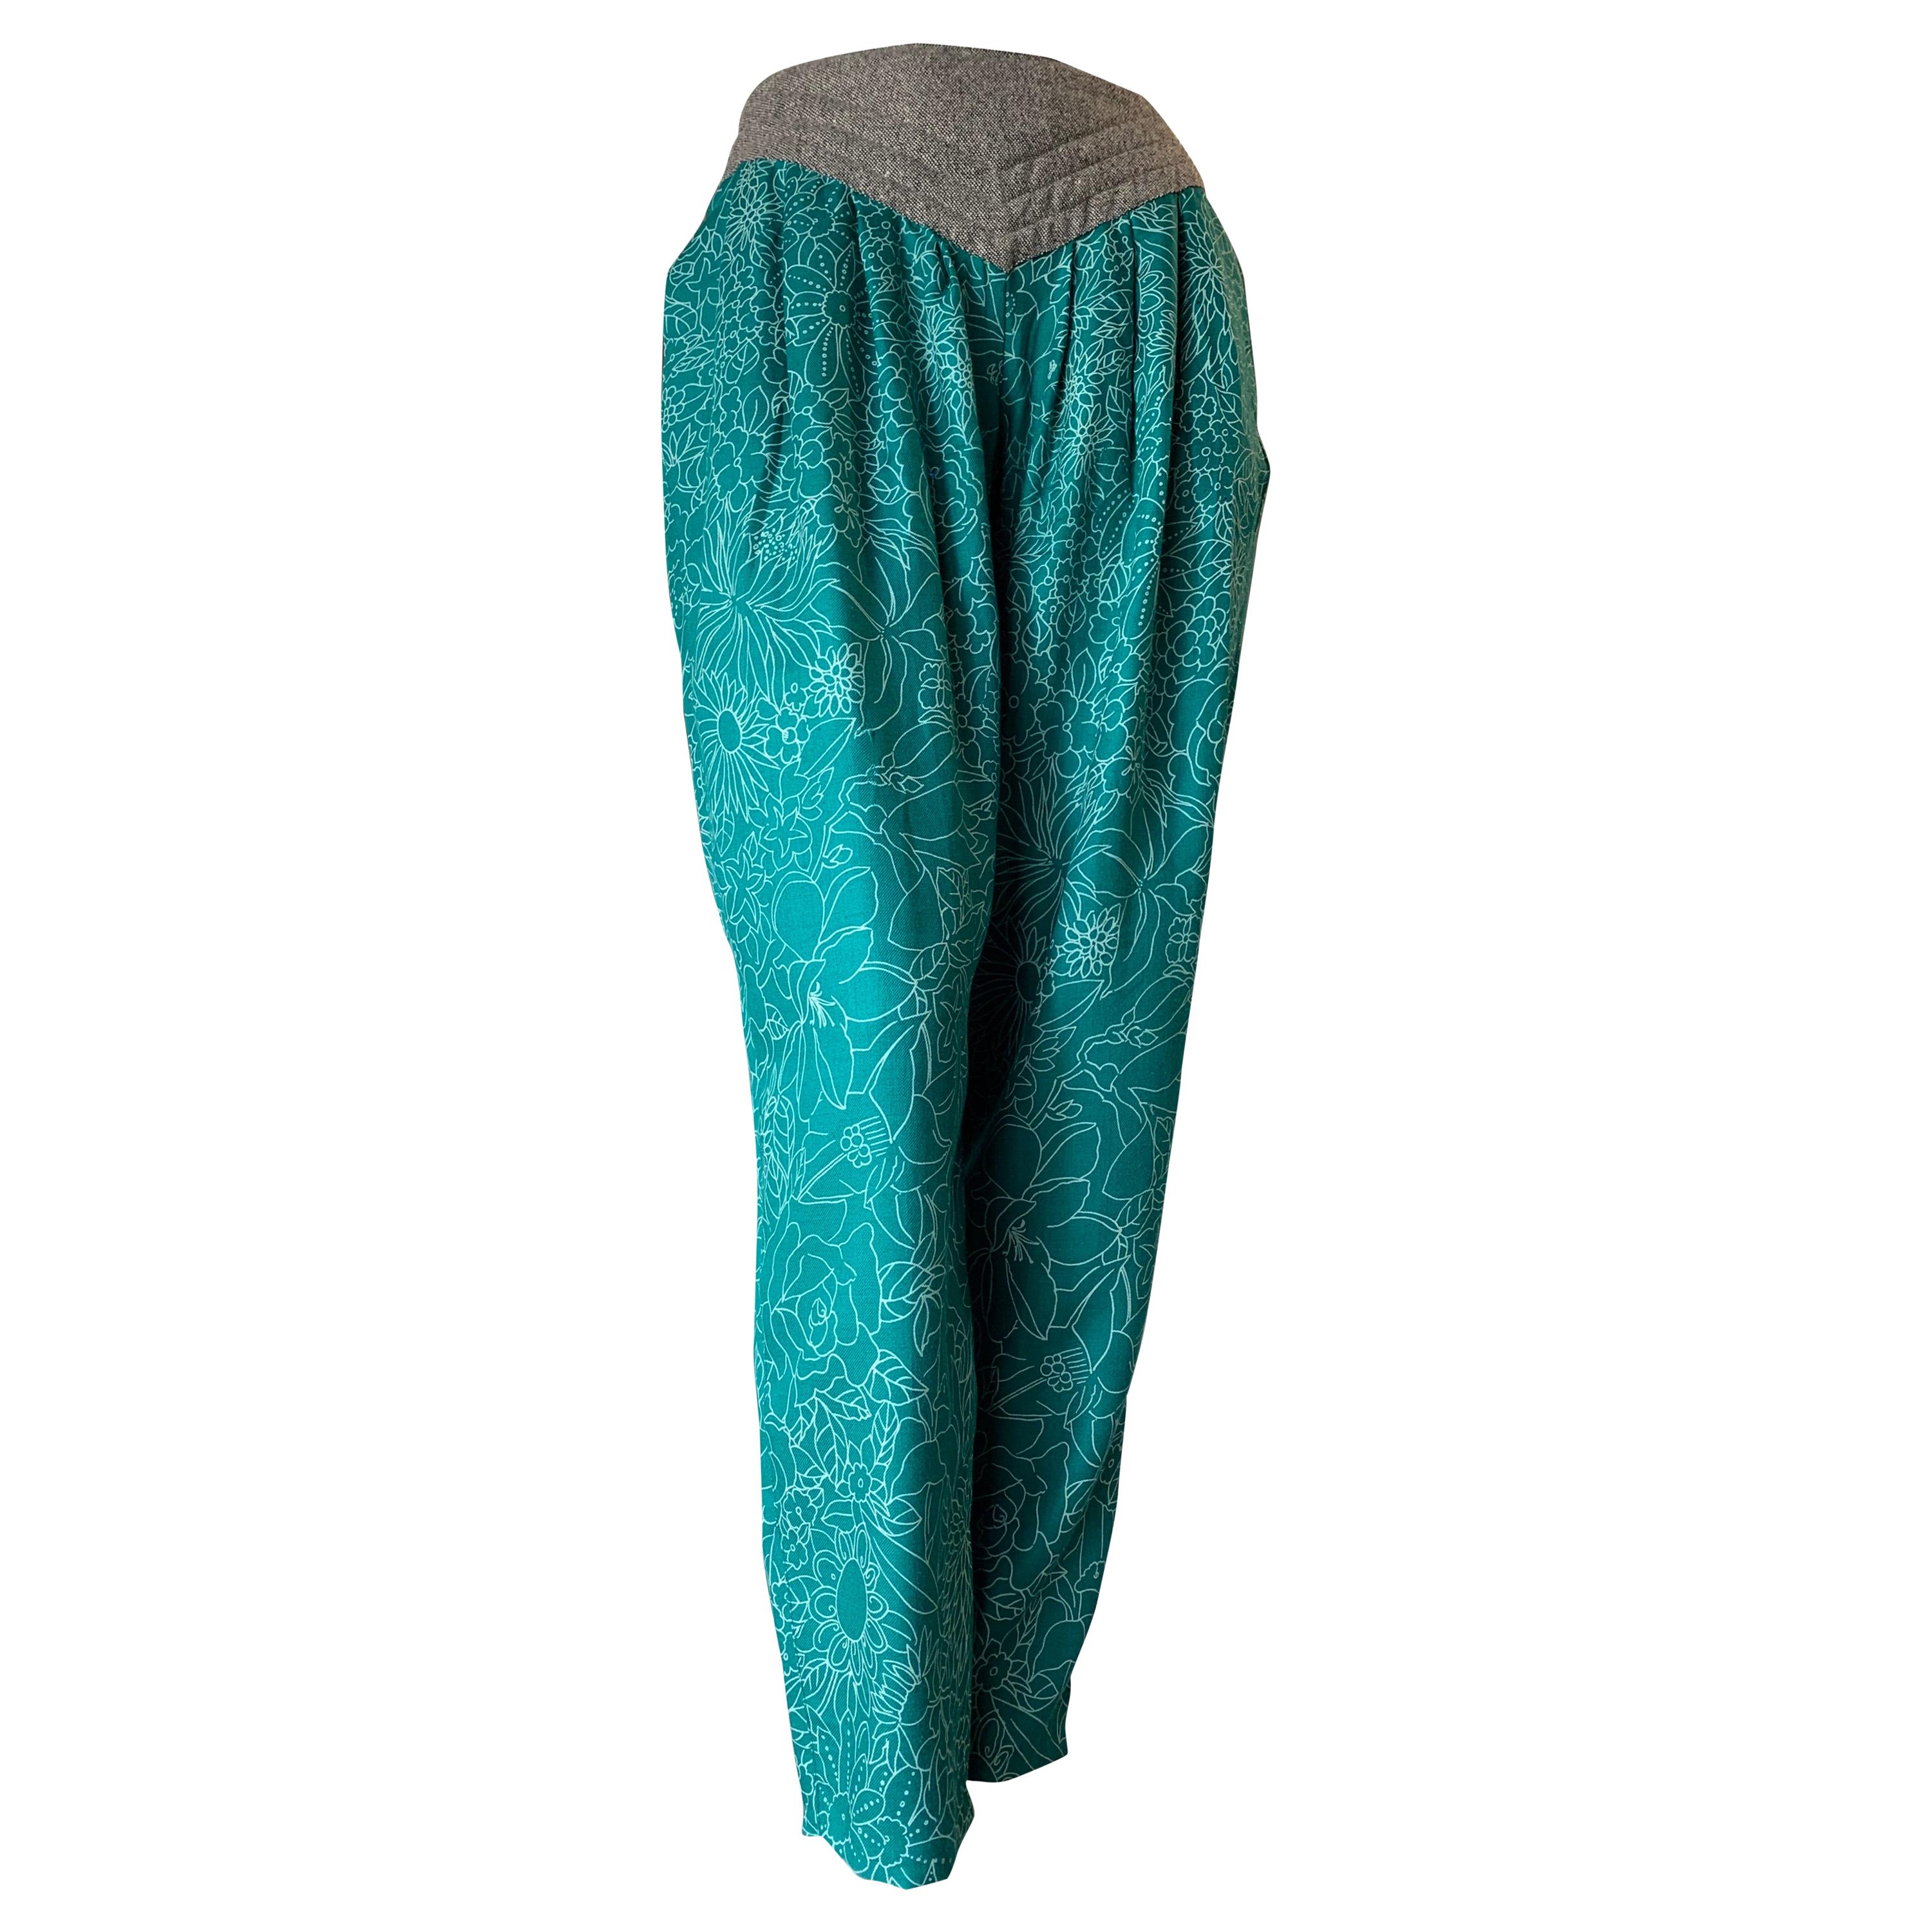 1980s Gianni Versace Harem Pants in Teal & White Floral Print & Trapunto Waist